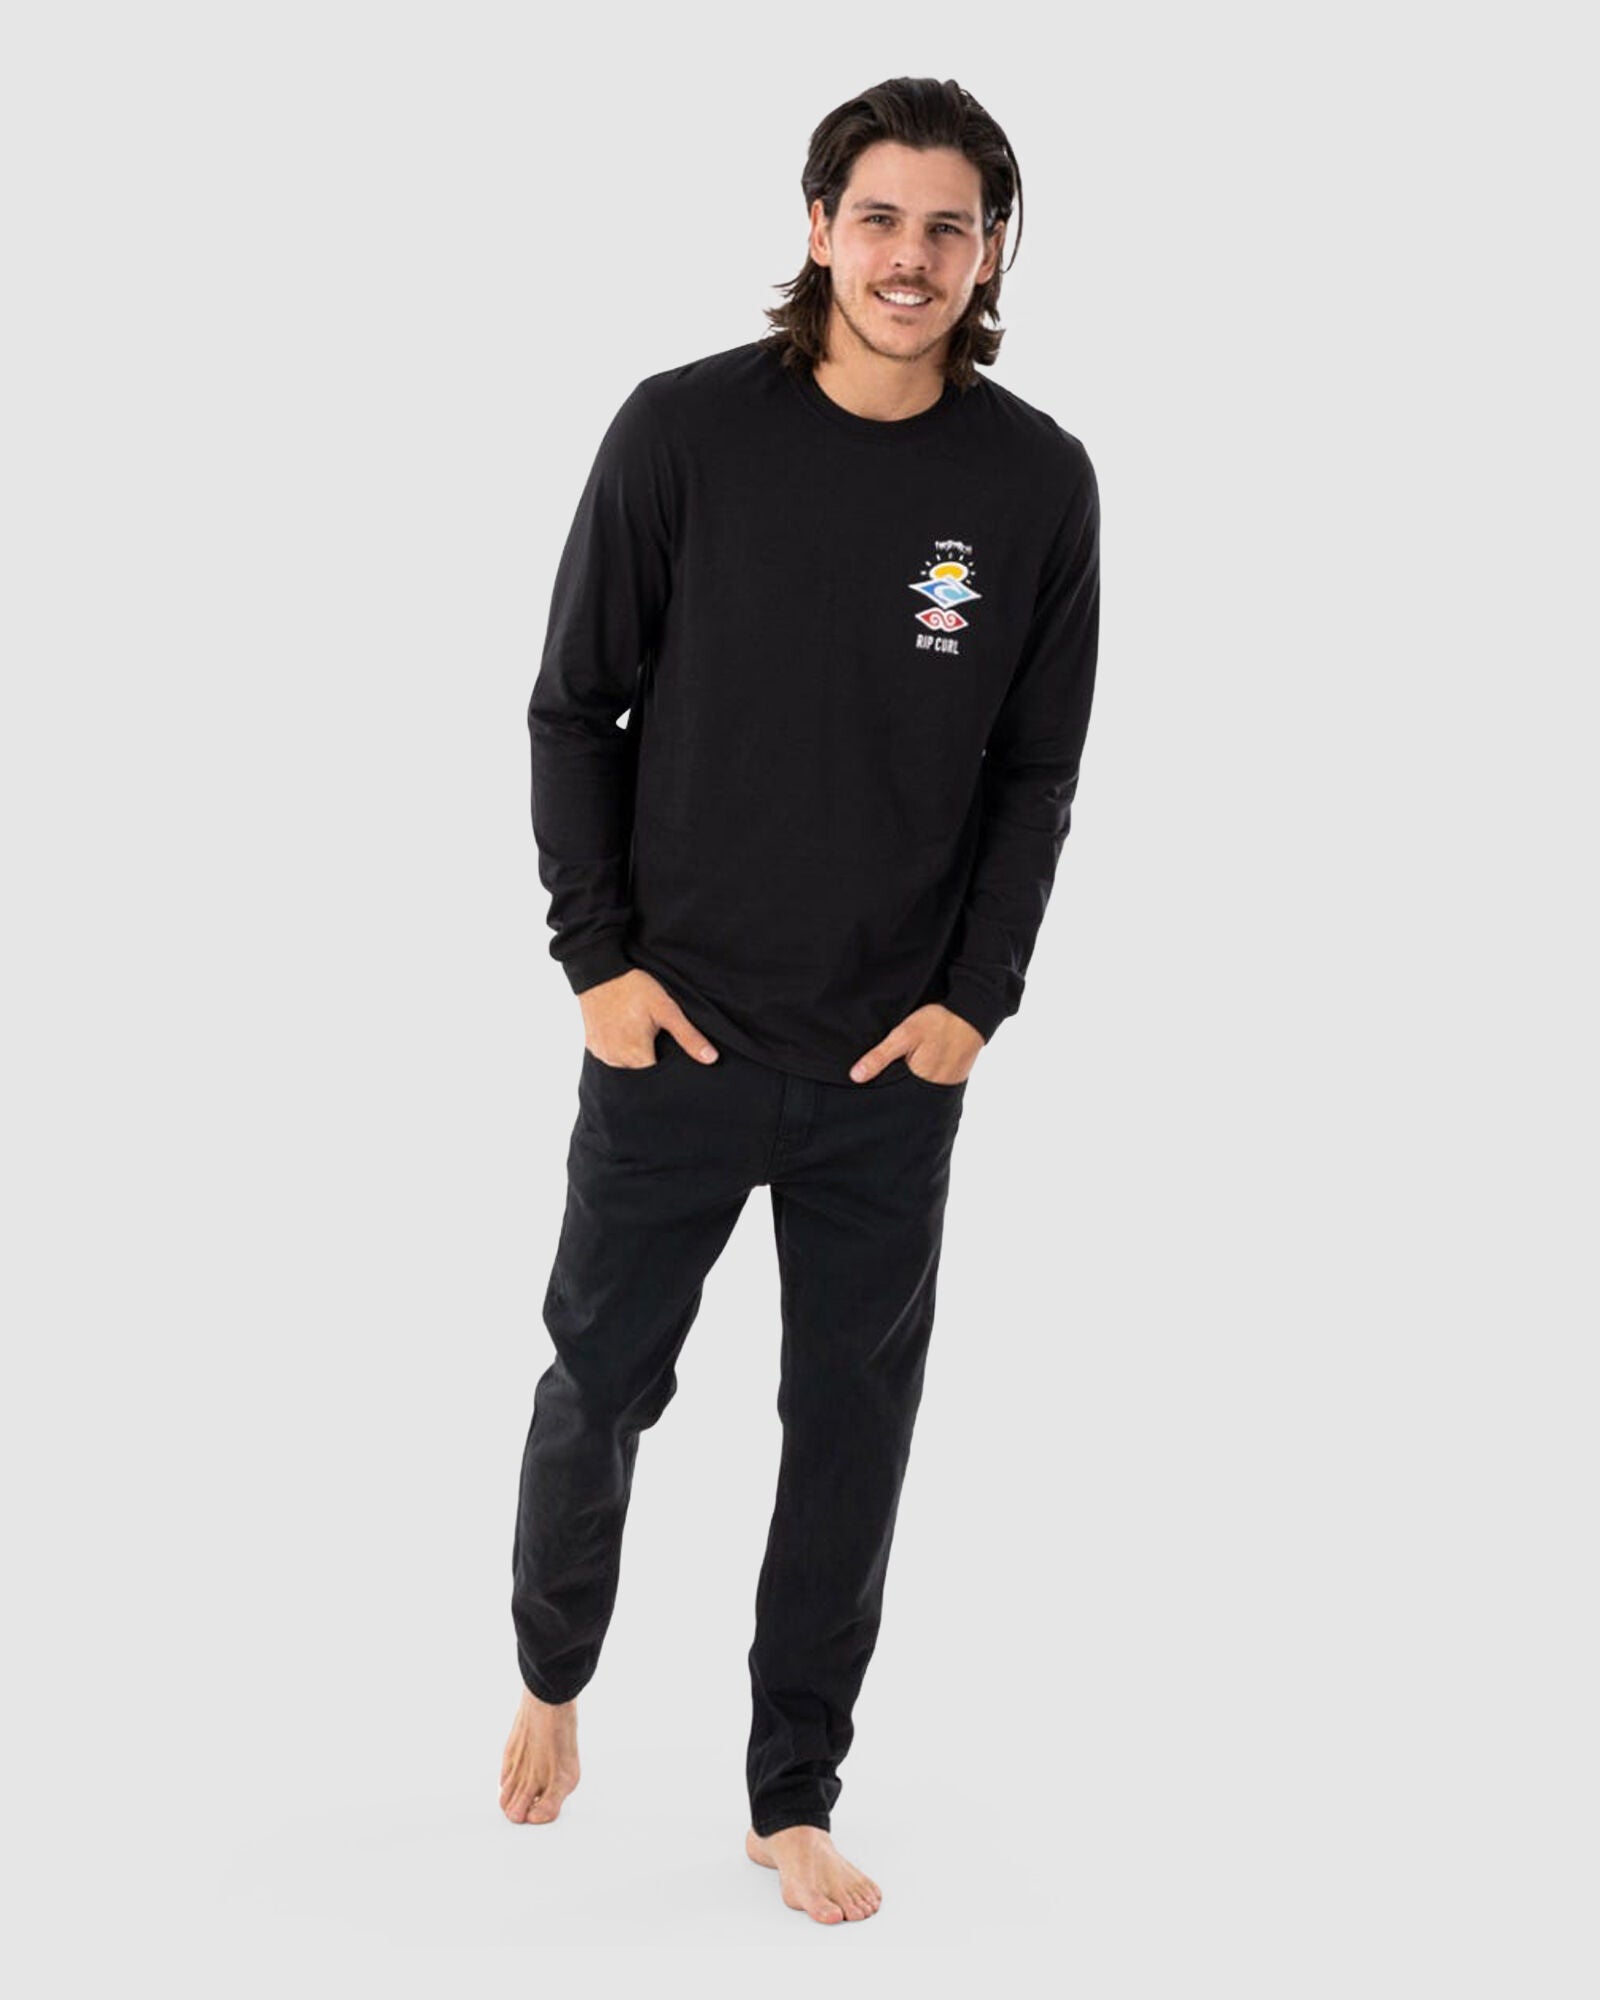 RIP CURL SEARCH ICON L/S CTESF9-0090 T-SHIRT LONG SLEEVE (M)